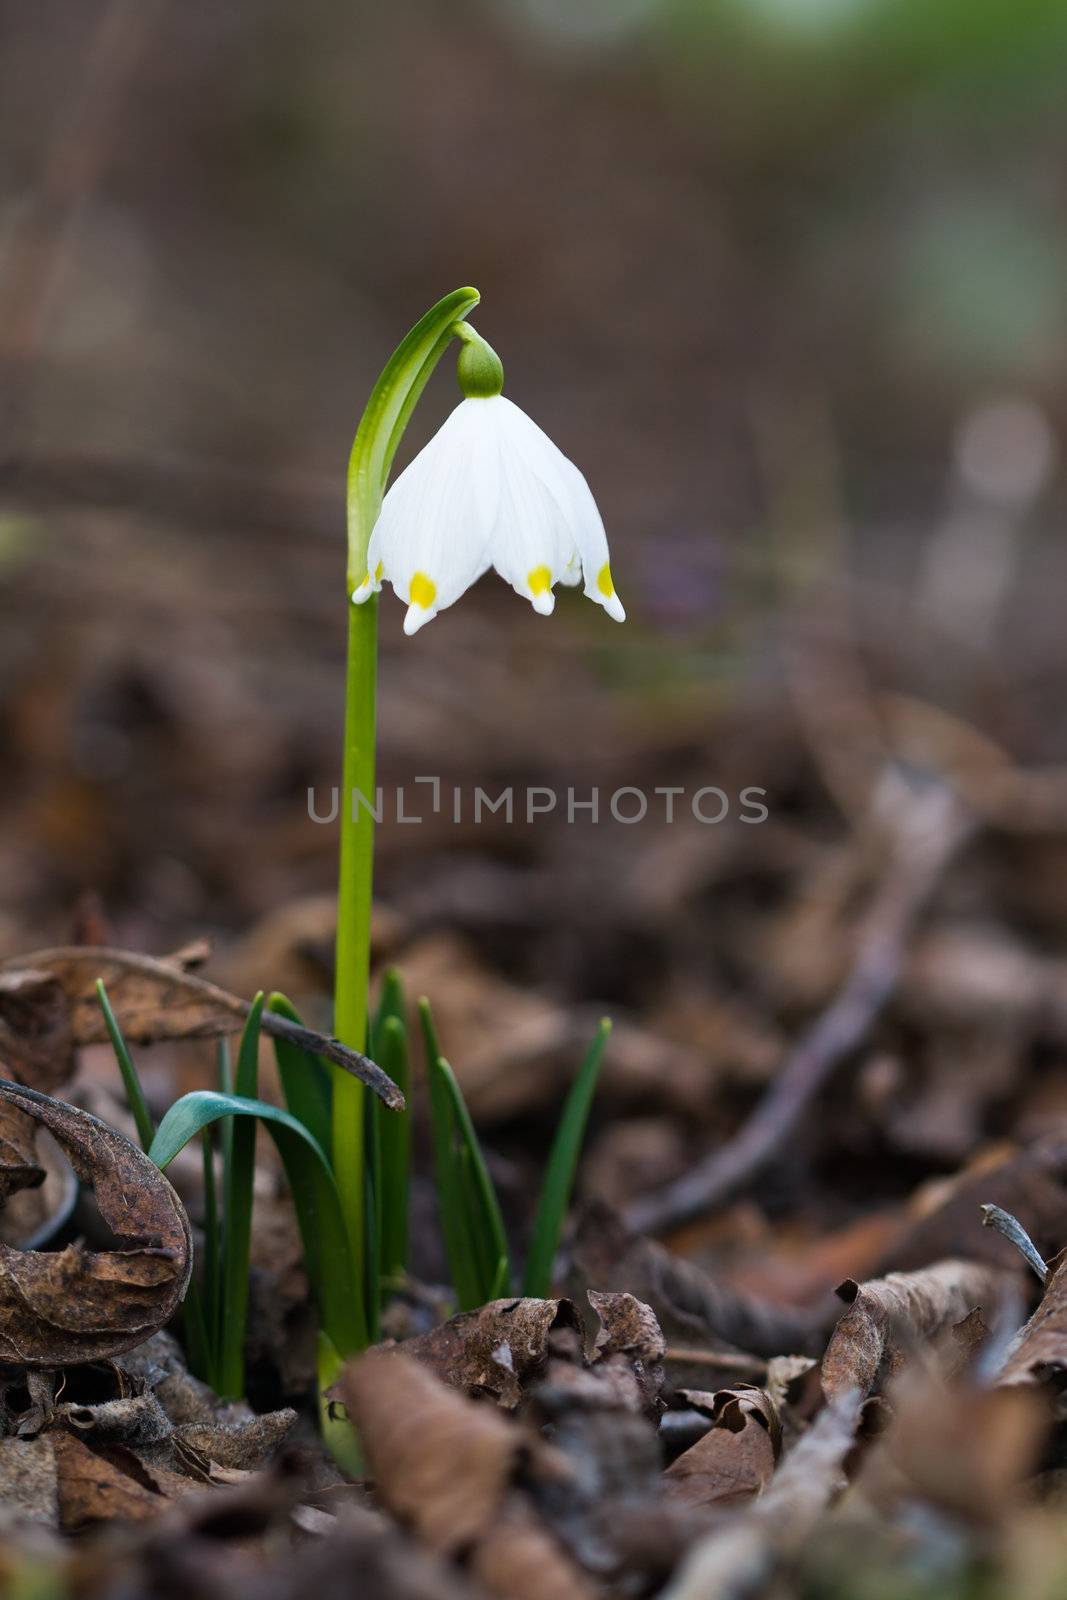 Signs of spring - the first snowdrop